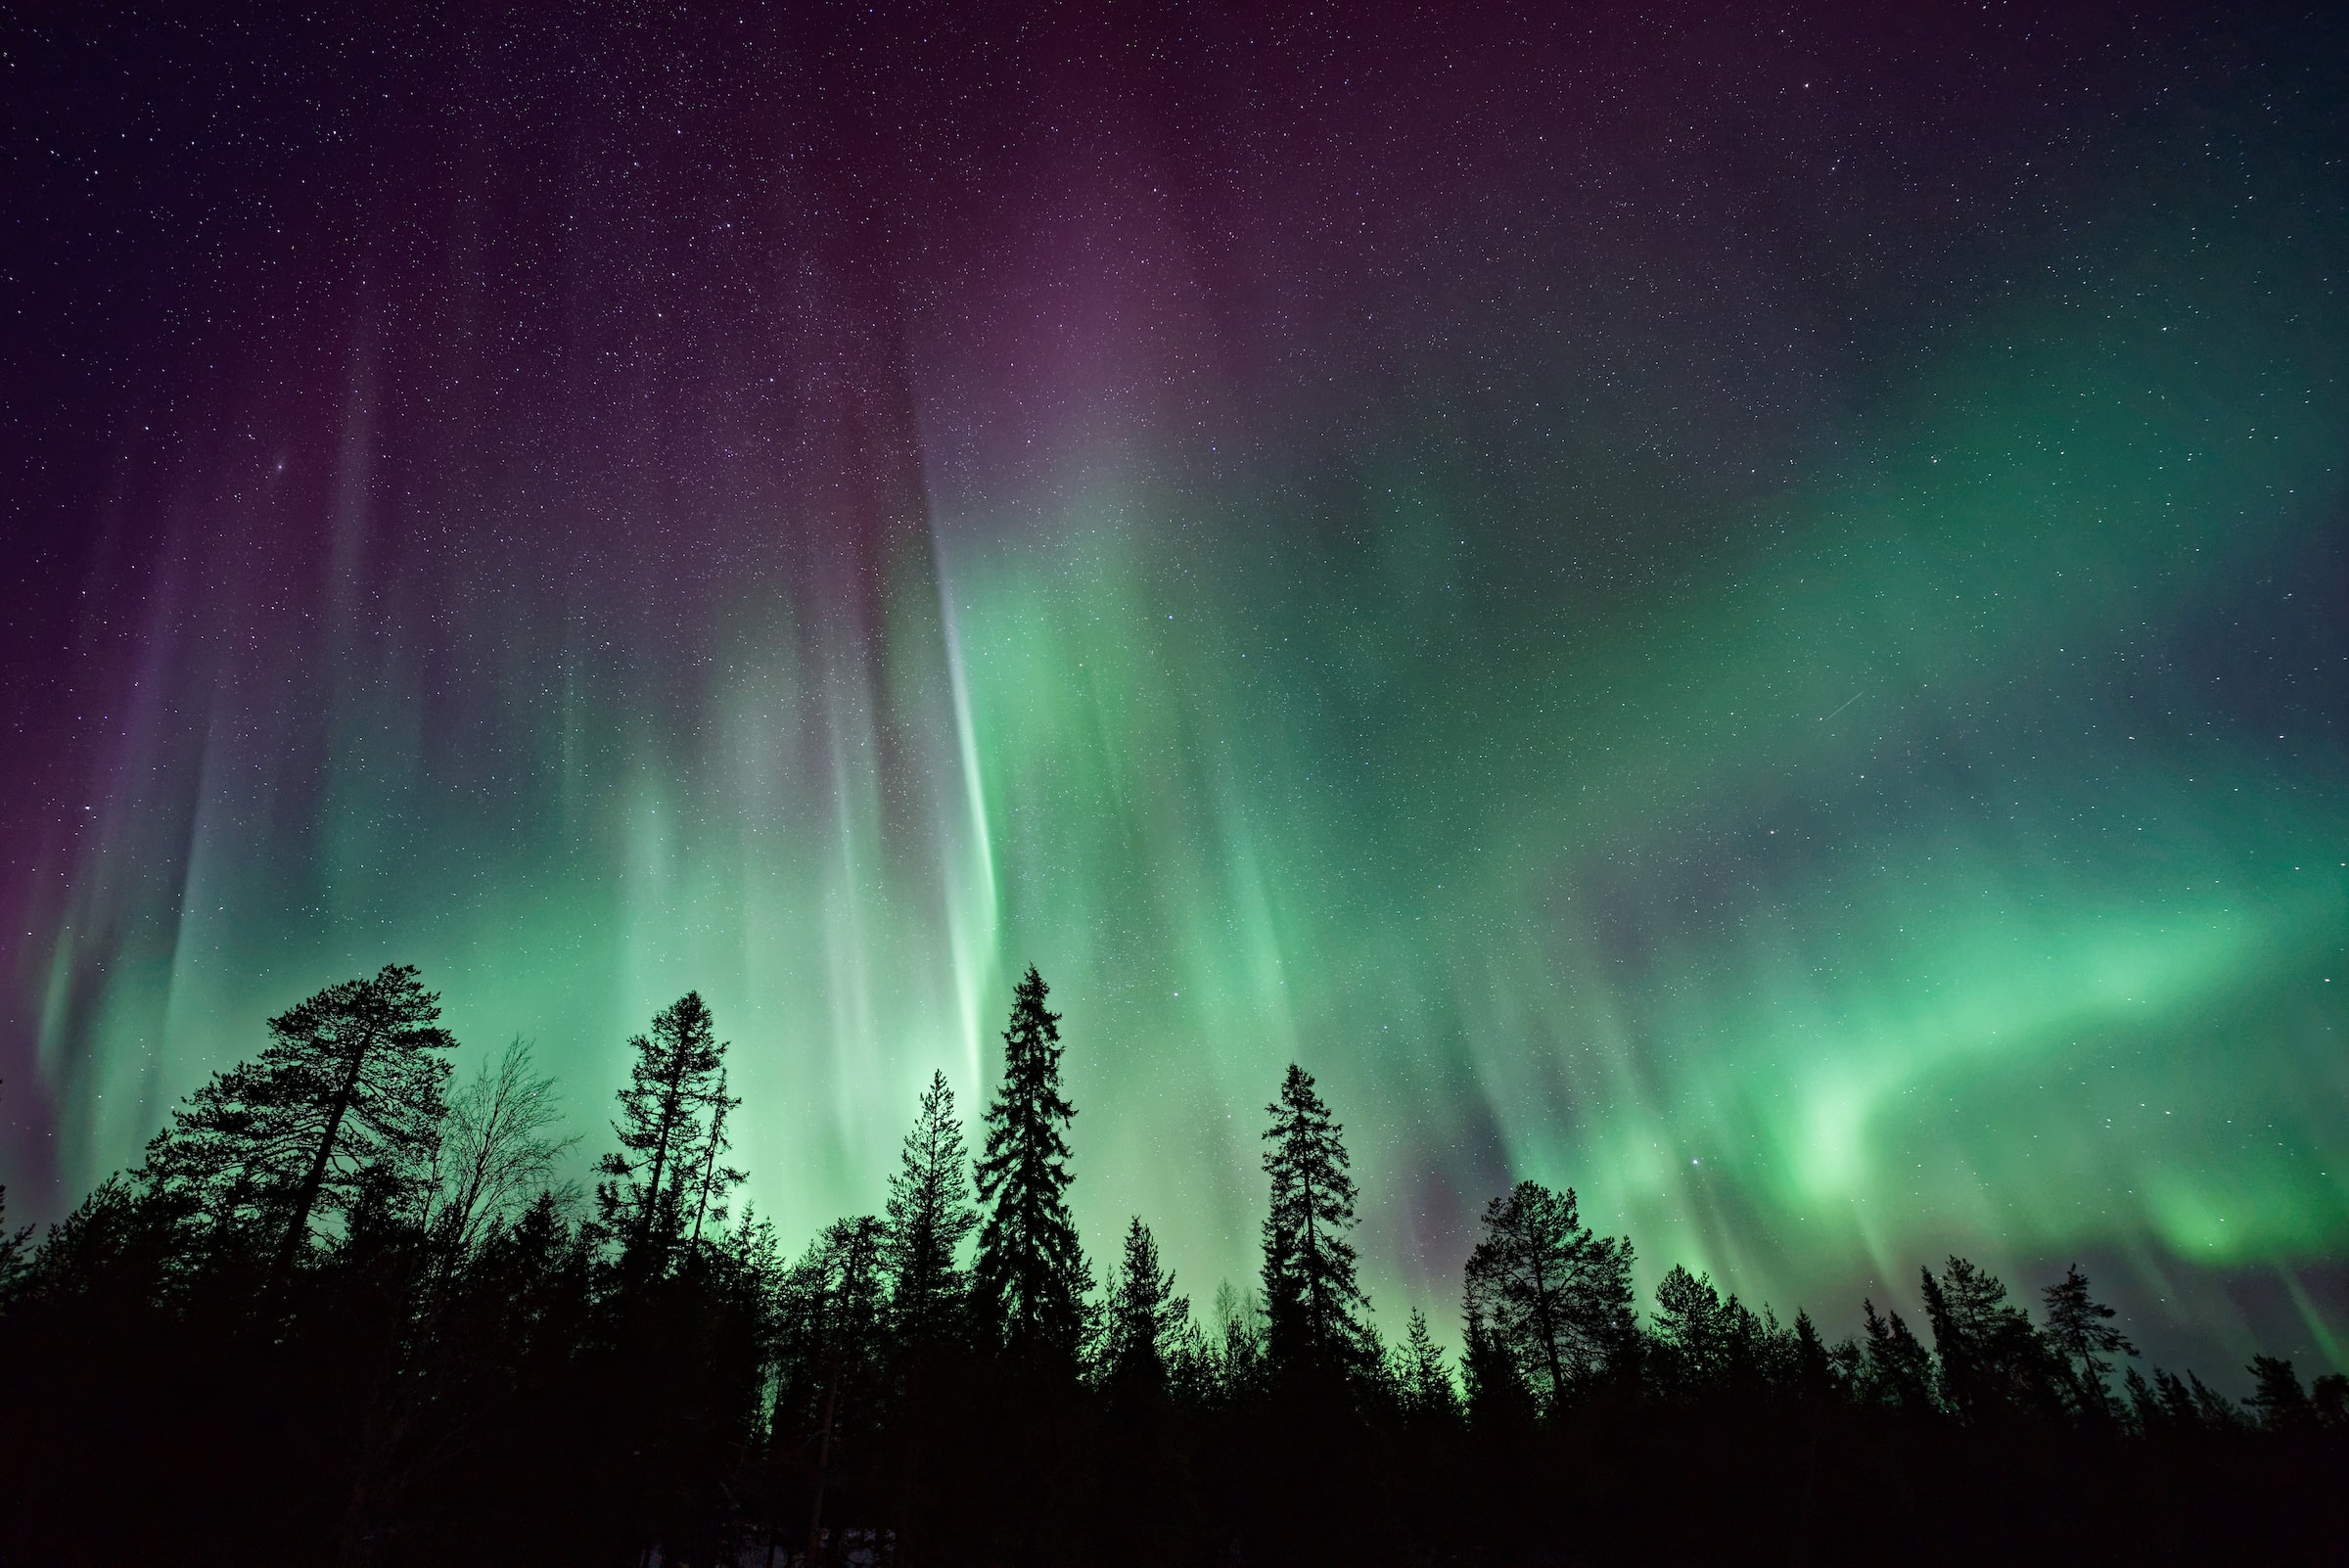 The Northern Lights with spectacular shafts of green and purple silhouetting a forest in the foreground